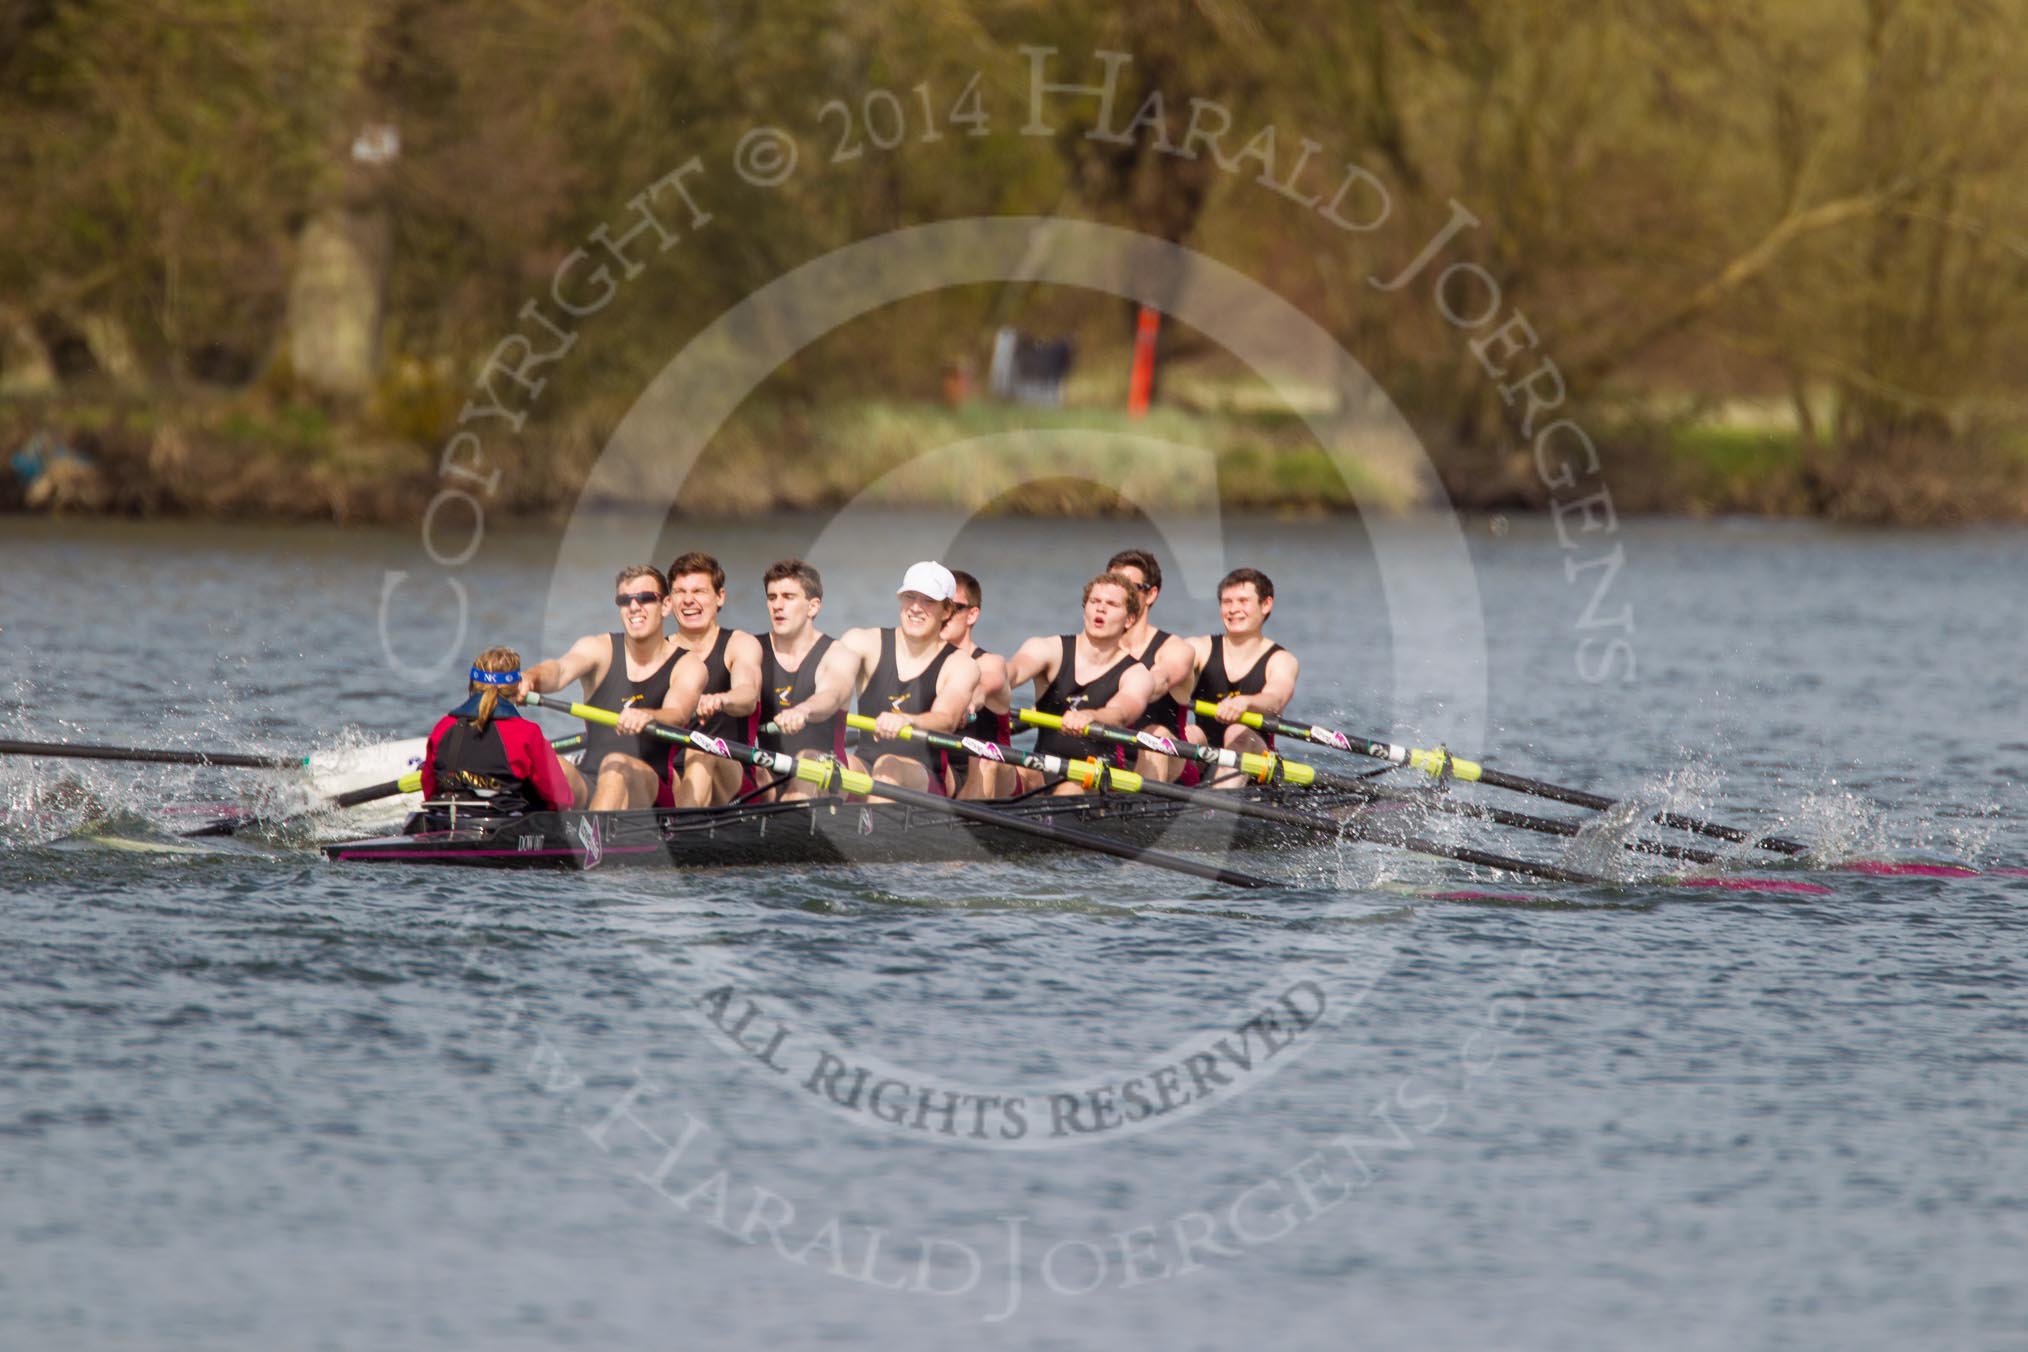 The Women's Boat Race and Henley Boat Races 2014: The Intercollegiate men's race. Downing College (Cambridge) approaching the finish line..
River Thames,
Henley-on-Thames,
Buckinghamshire,
United Kingdom,
on 30 March 2014 at 13:52, image #110